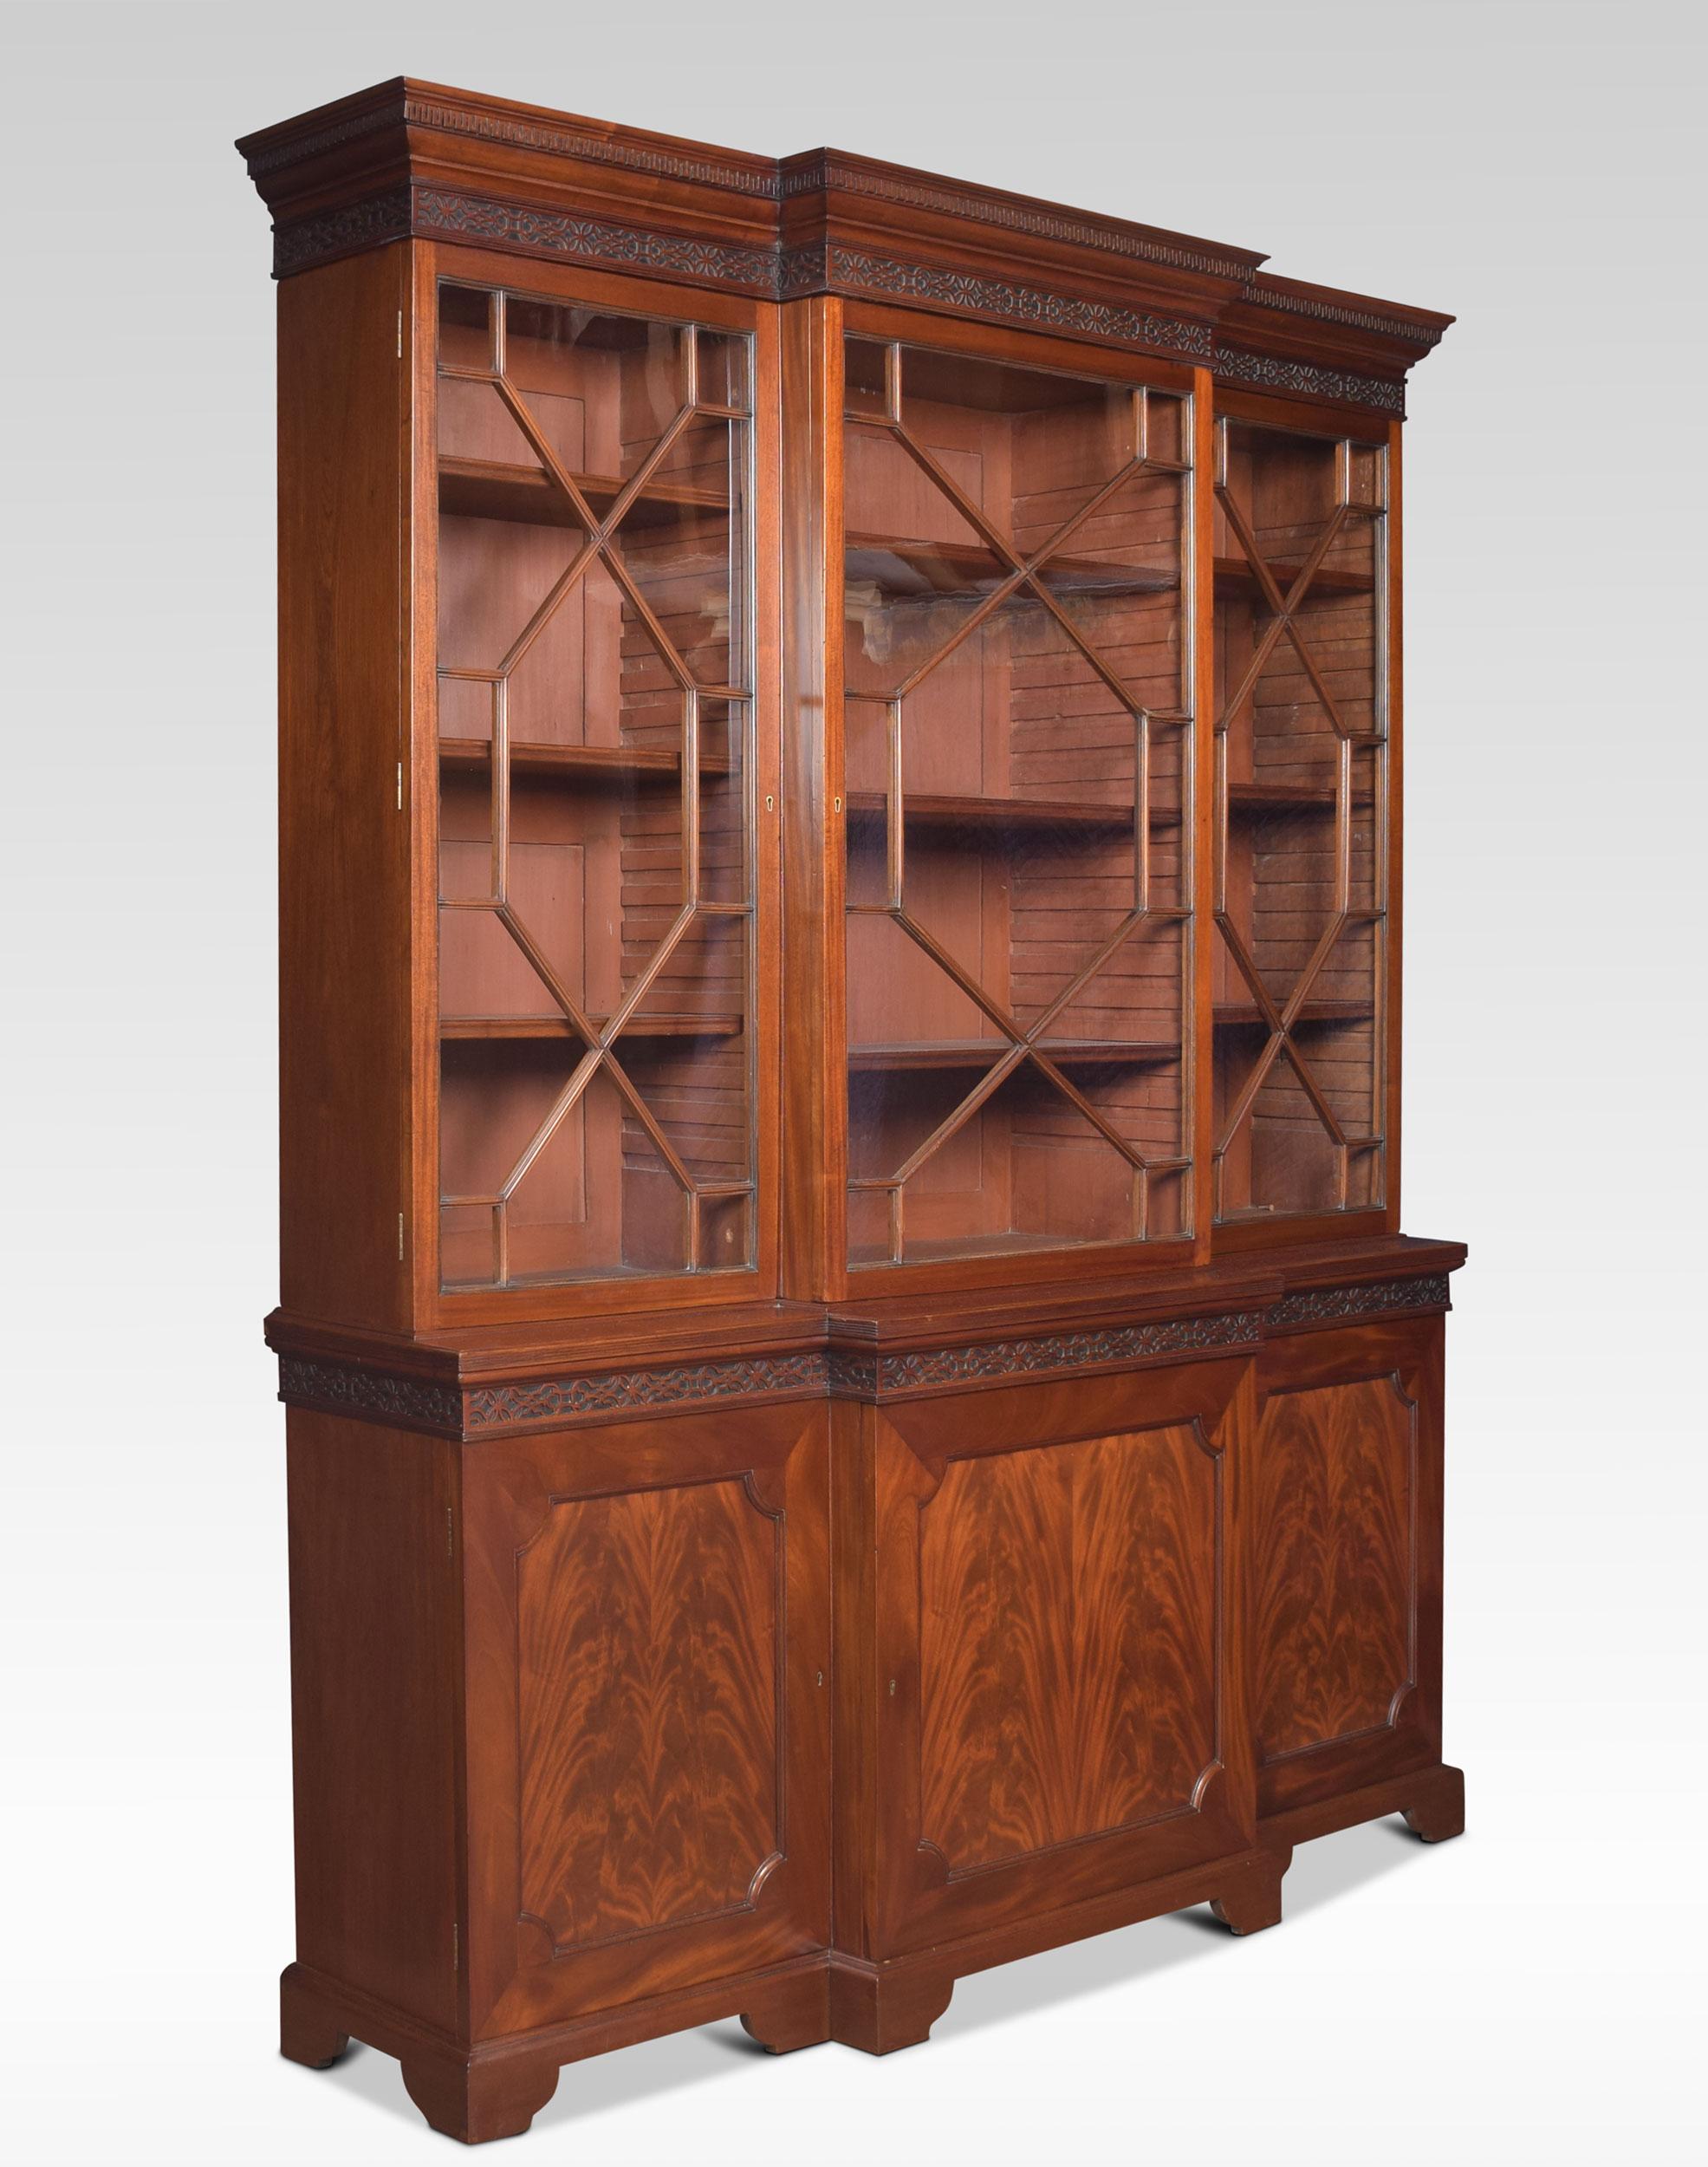 Large Chippendale revival mahogany bookcase the carved moulded blind fret projecting cornice, above one large central astragal glazed door flanked by two further small glazed doors opening to reveal an adjustable shelved interior. To the base